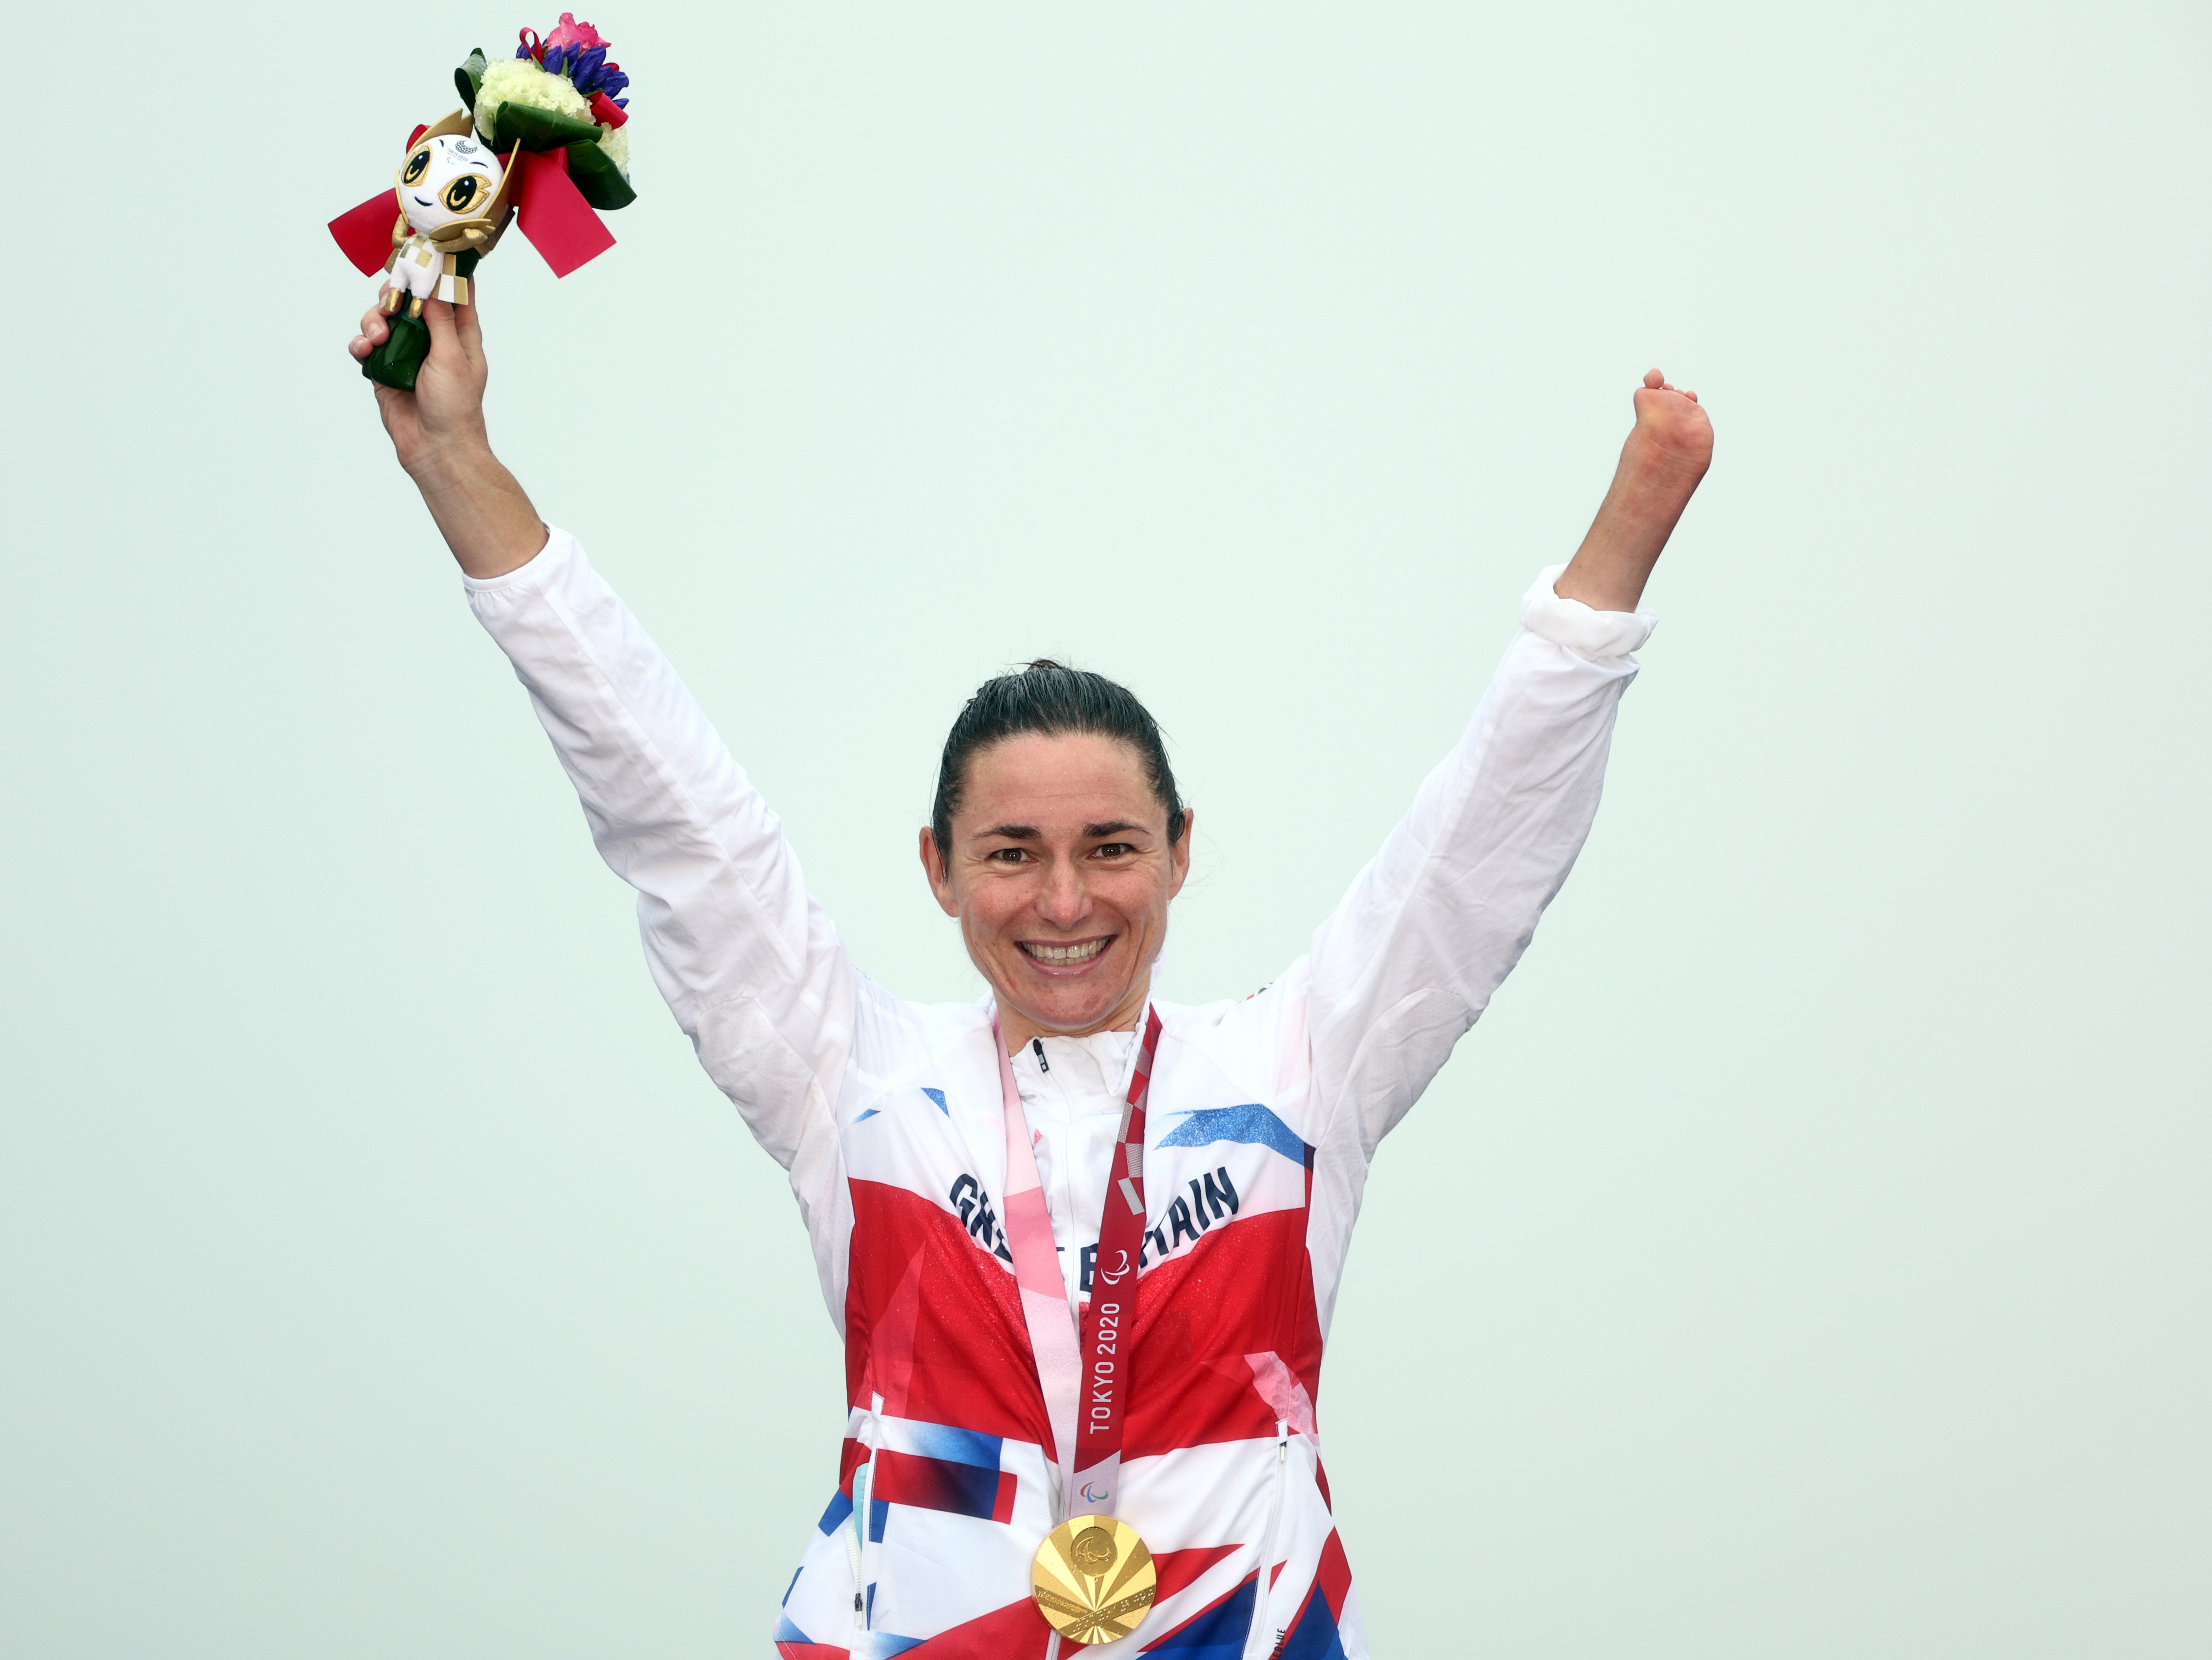 Dame Sarah Storey celebrates her victory in the women’s C4-5 road race